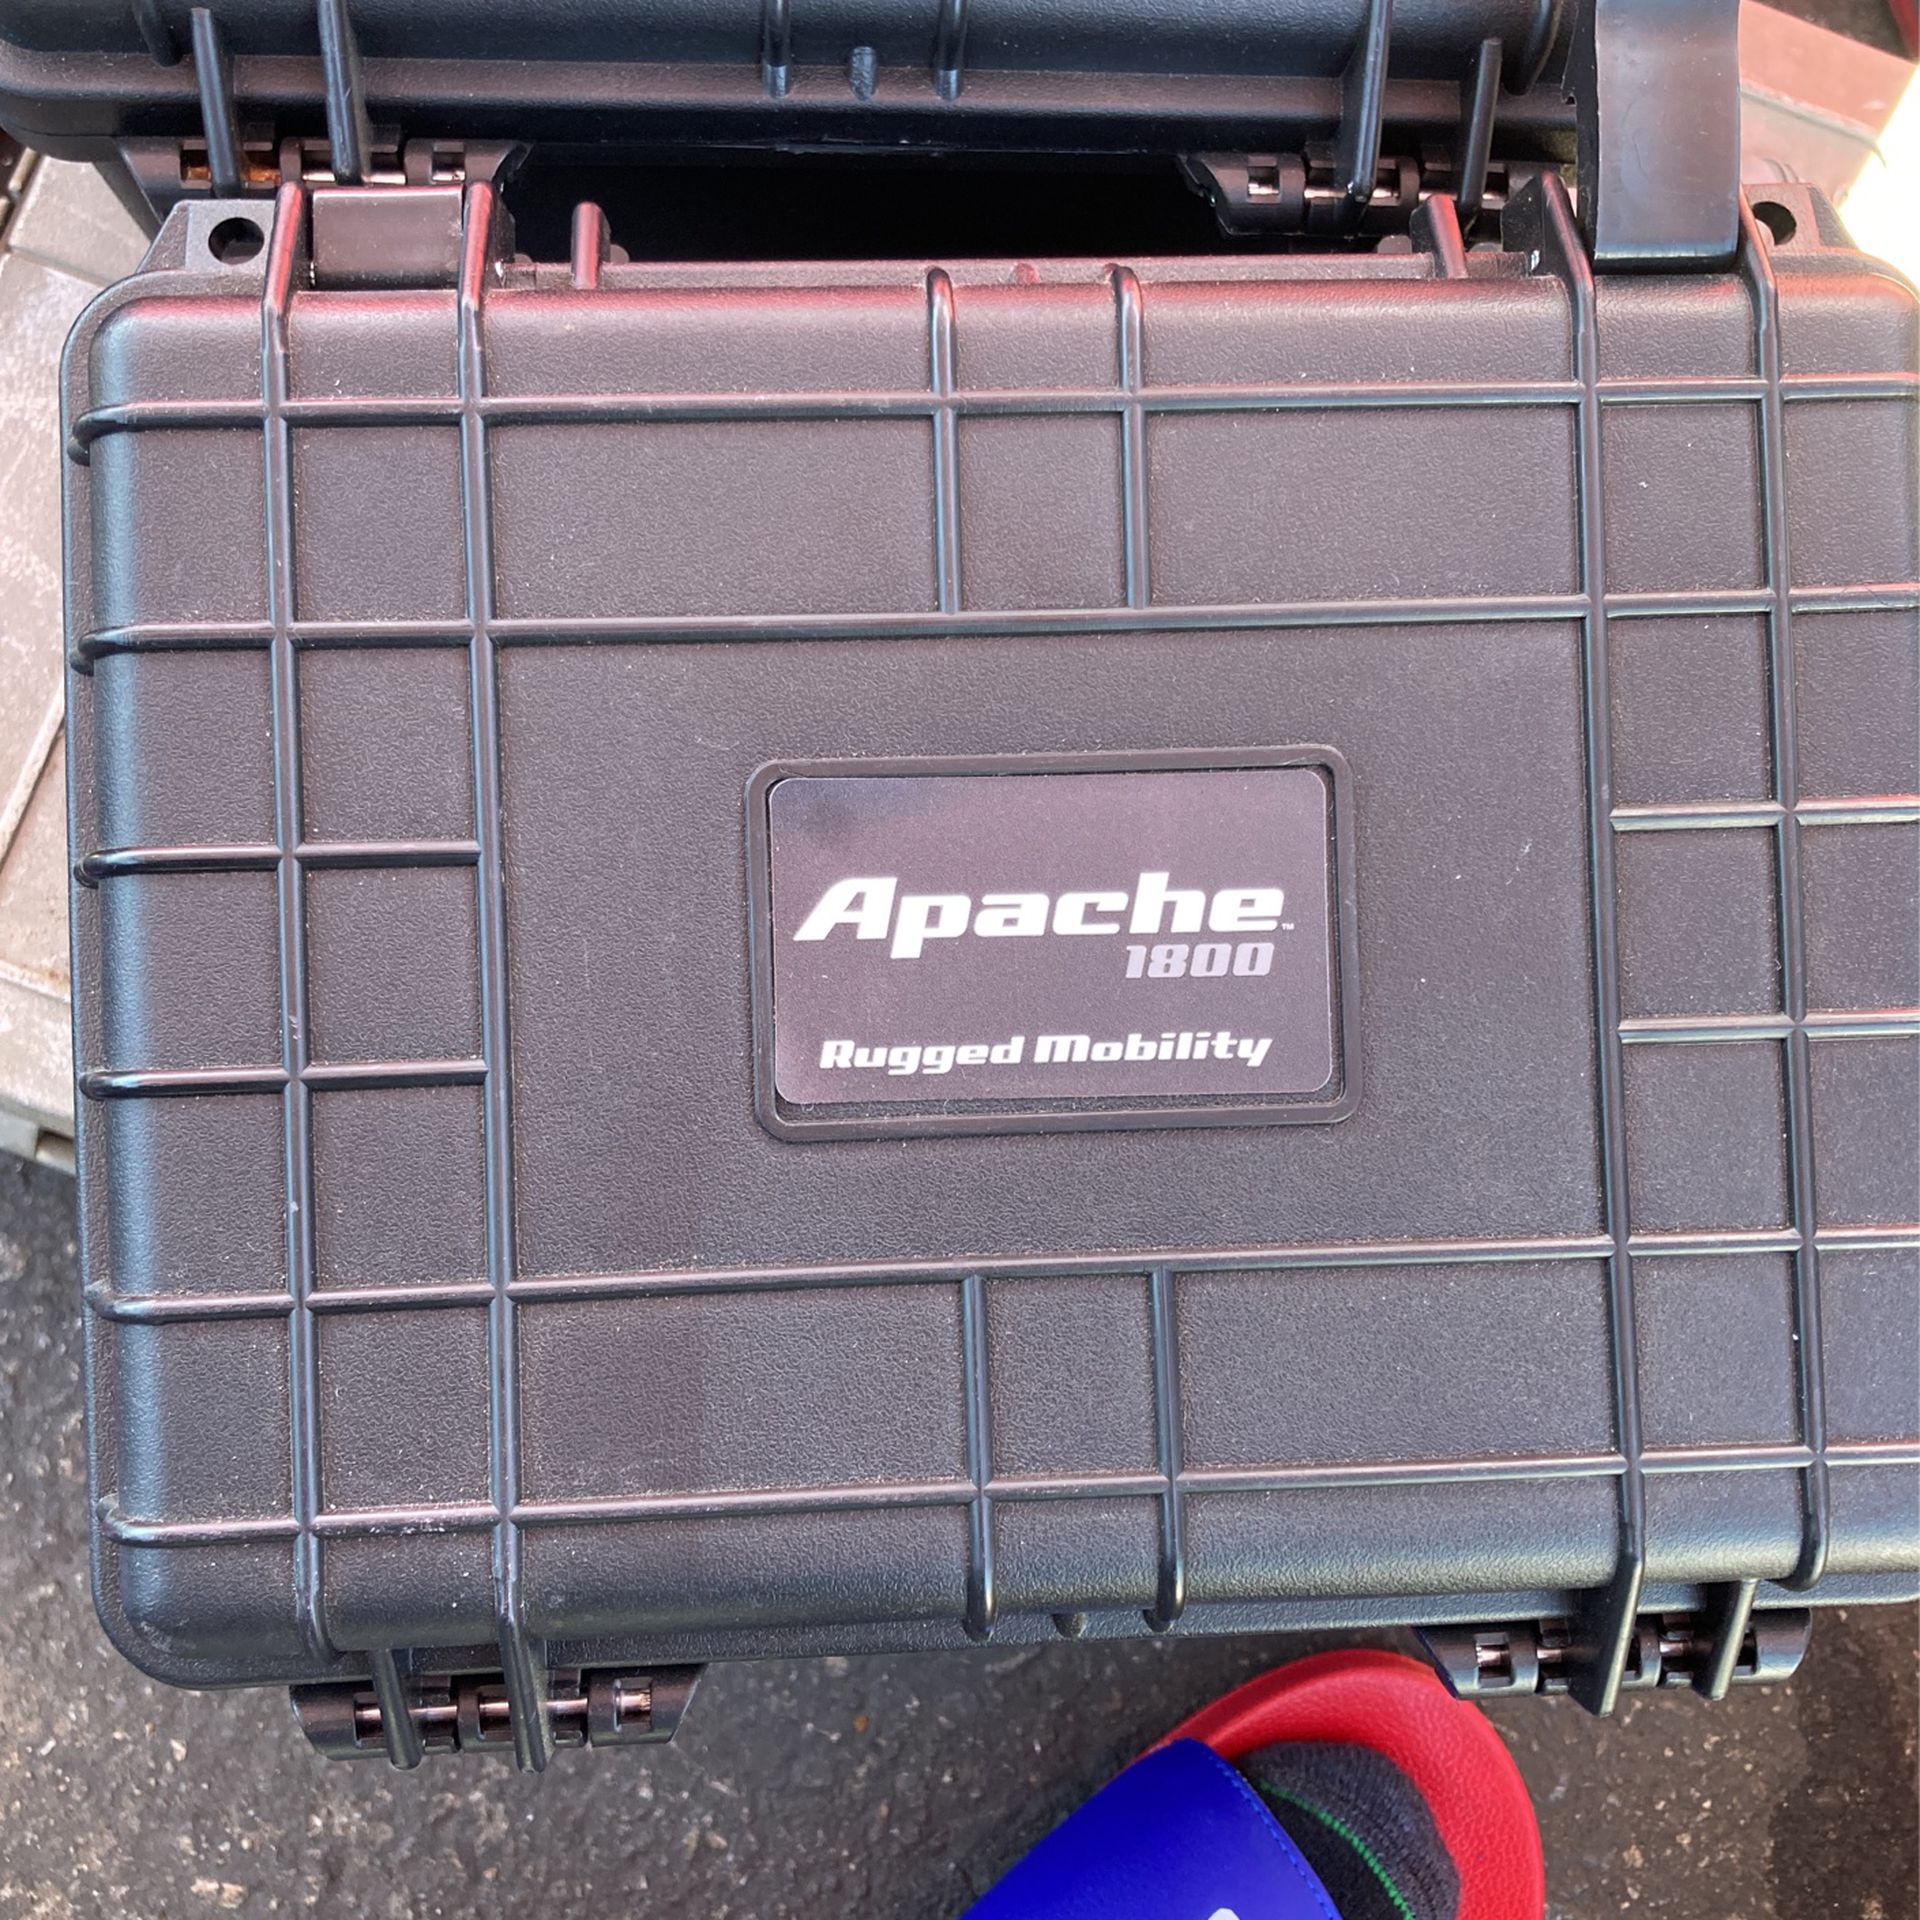 Apache 1800 Rugged Mobility 